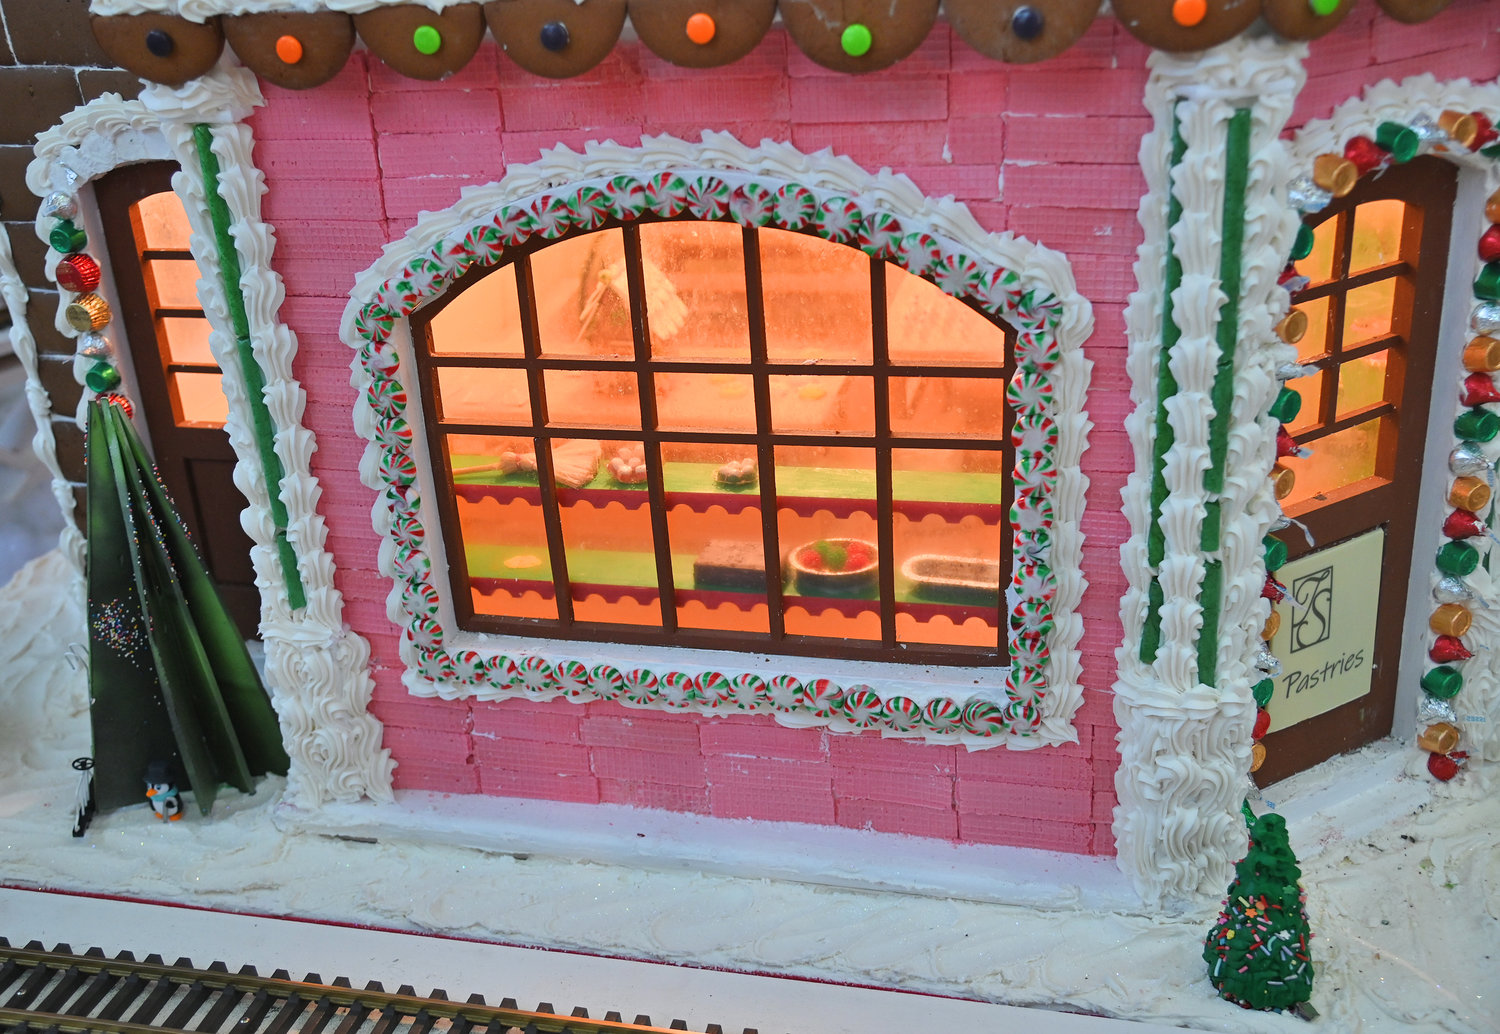 A look through the Pastries gingerbread house at Turning Stone Casino Thursday, November 30, 2022.